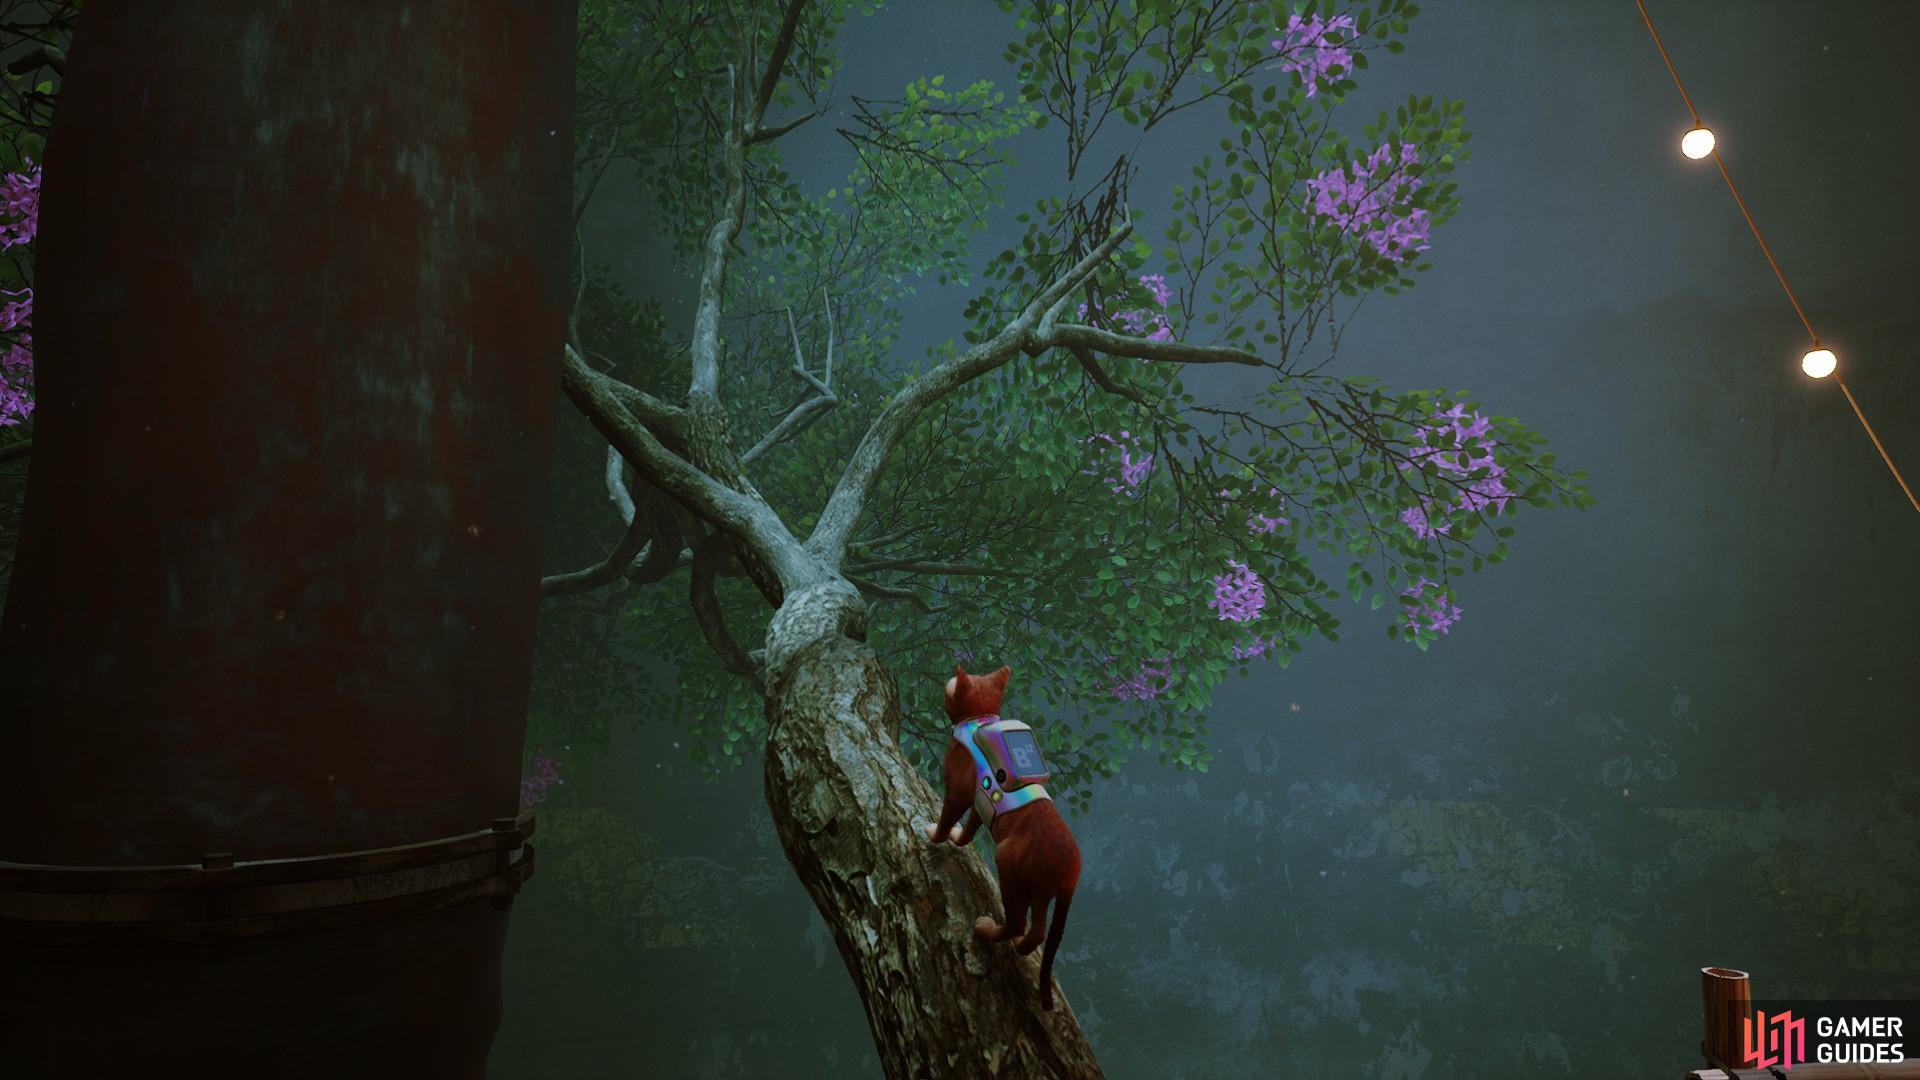 Climb the tree for the purple flower location.